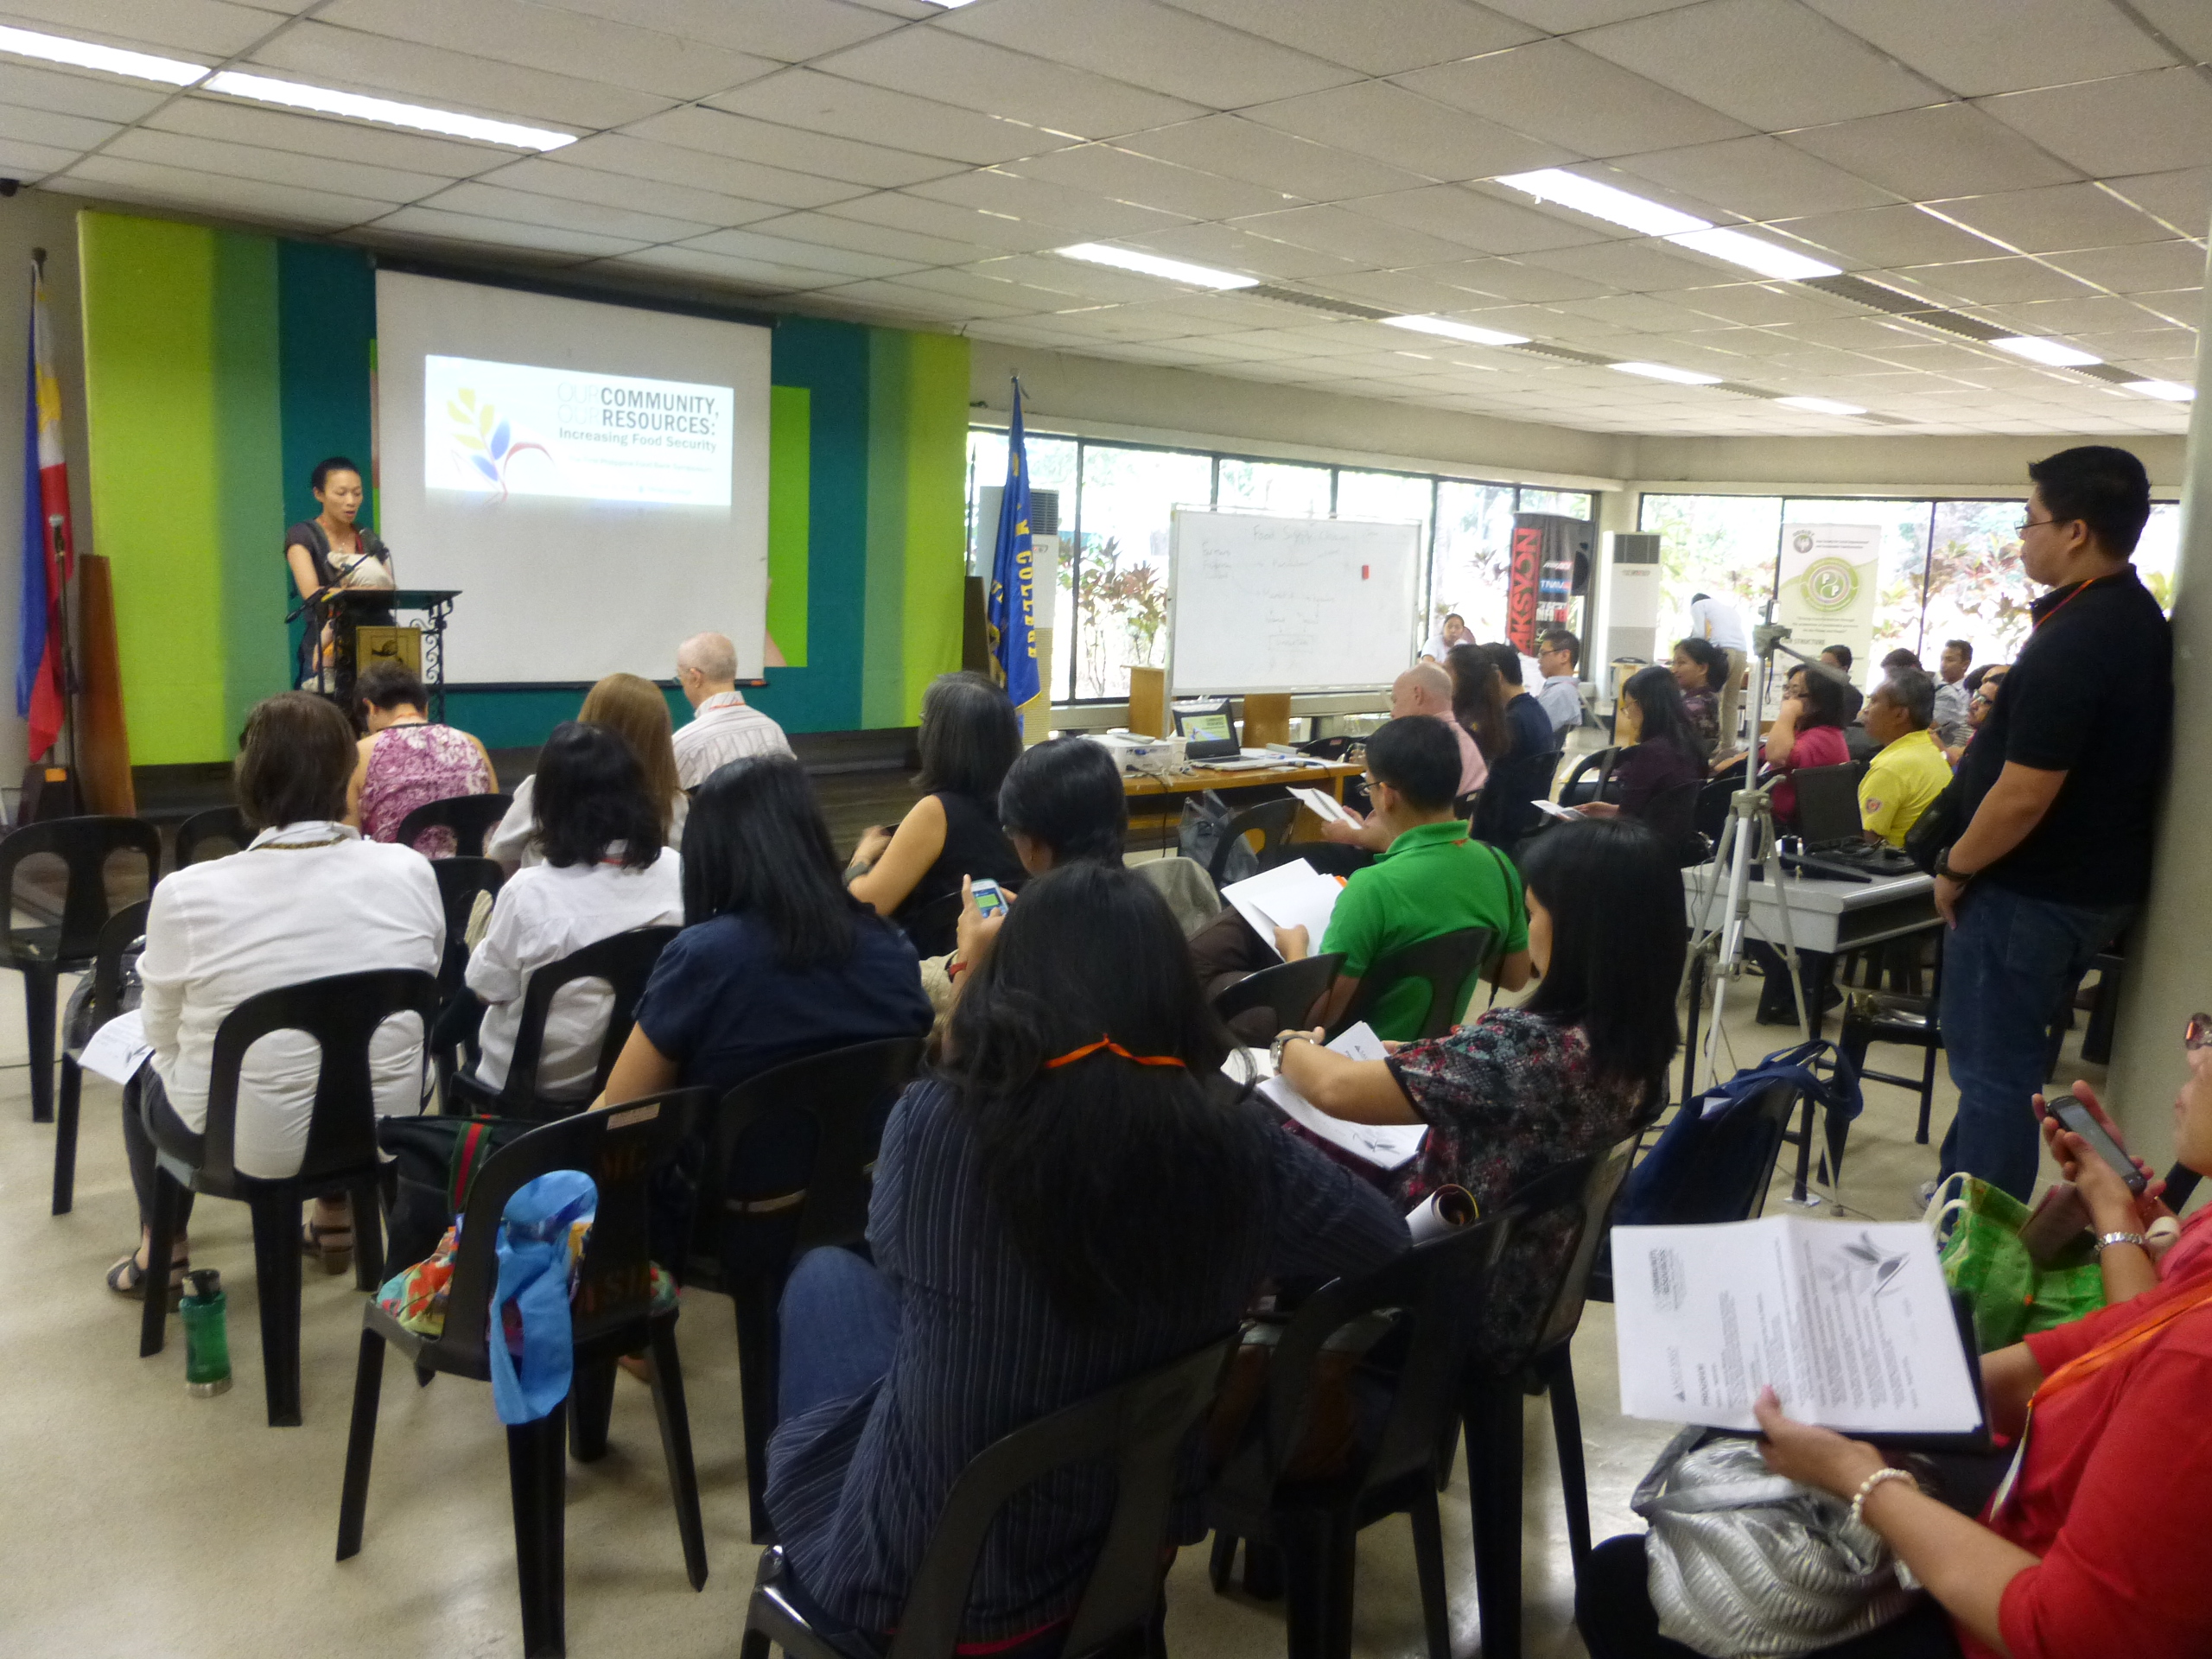 Food Bank Symposium in the Philippines (March 2014, Sylff Leadership Initiatives)